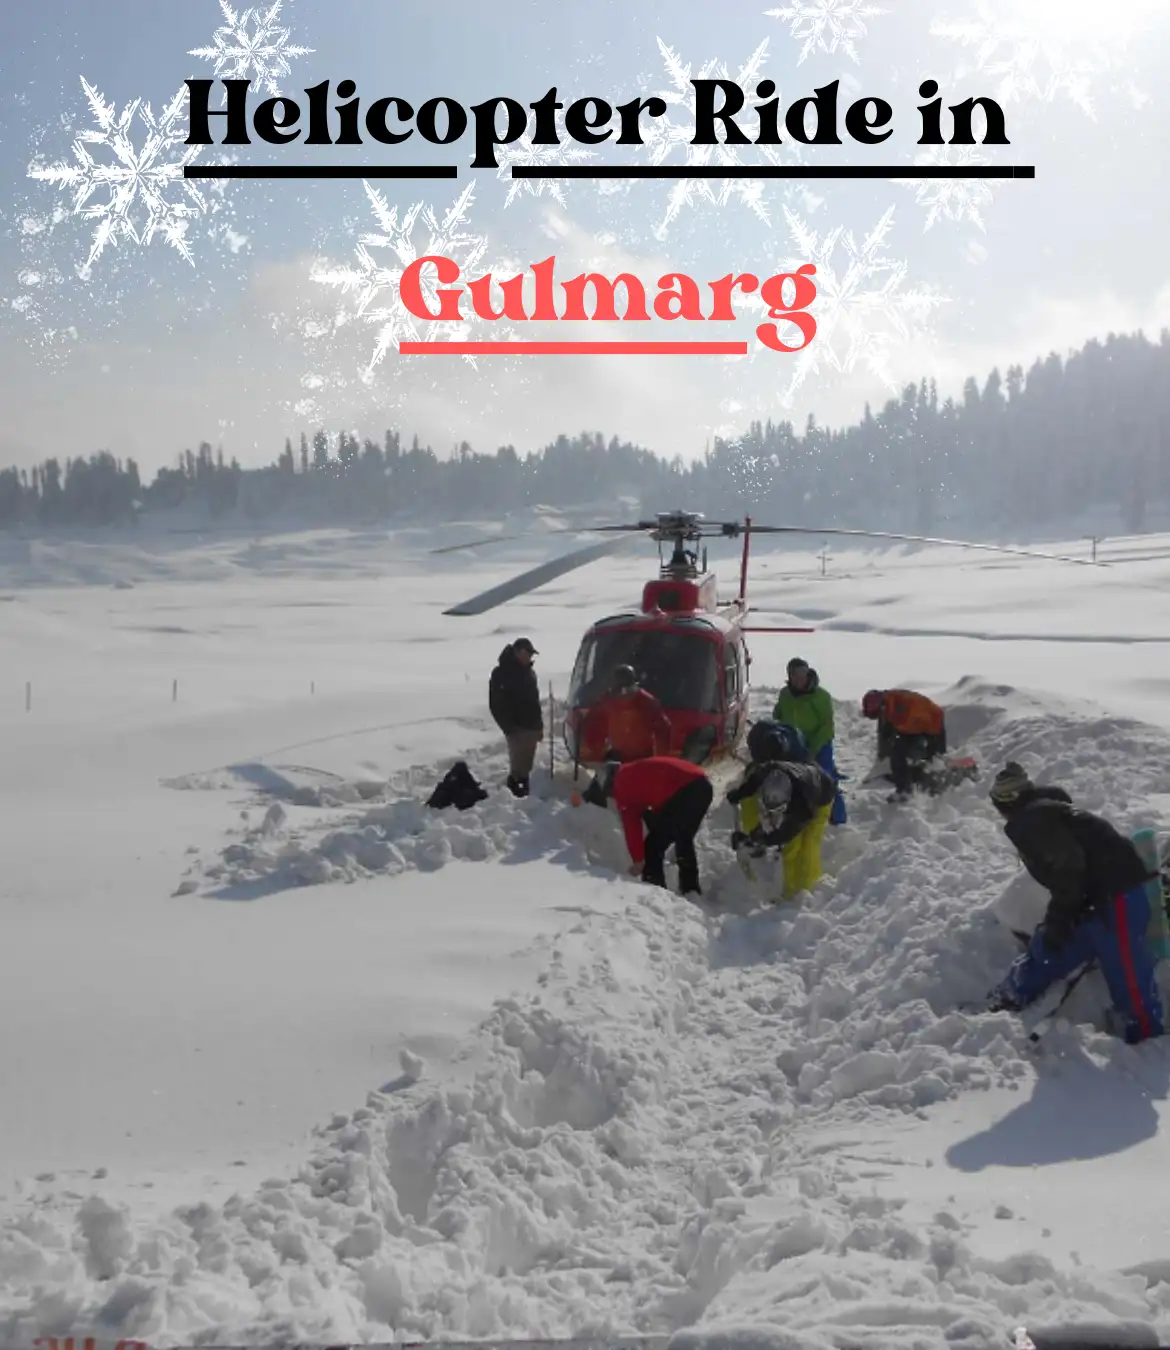 Helicopter Ride in Gulmarg